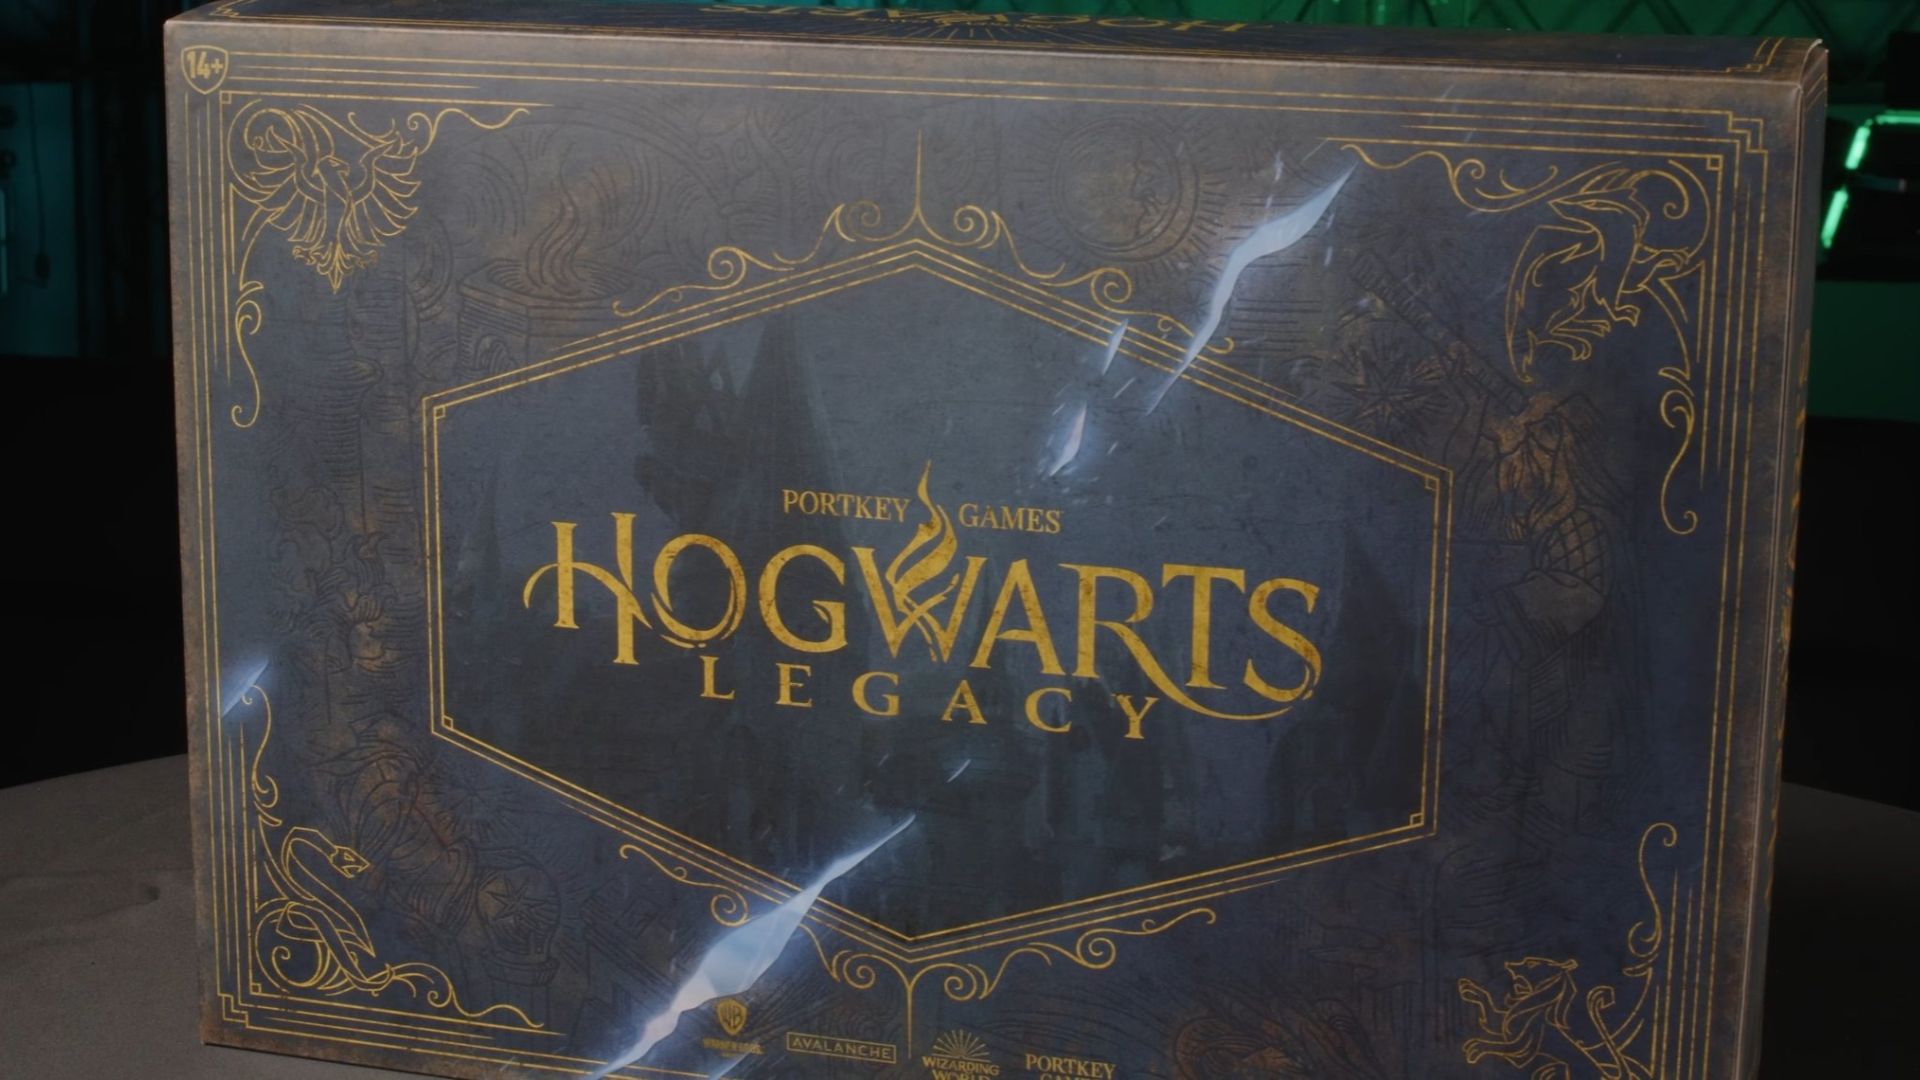  Hogwarts Legacy Collector's Edition - PlayStation 4 : Whv  Games: Everything Else